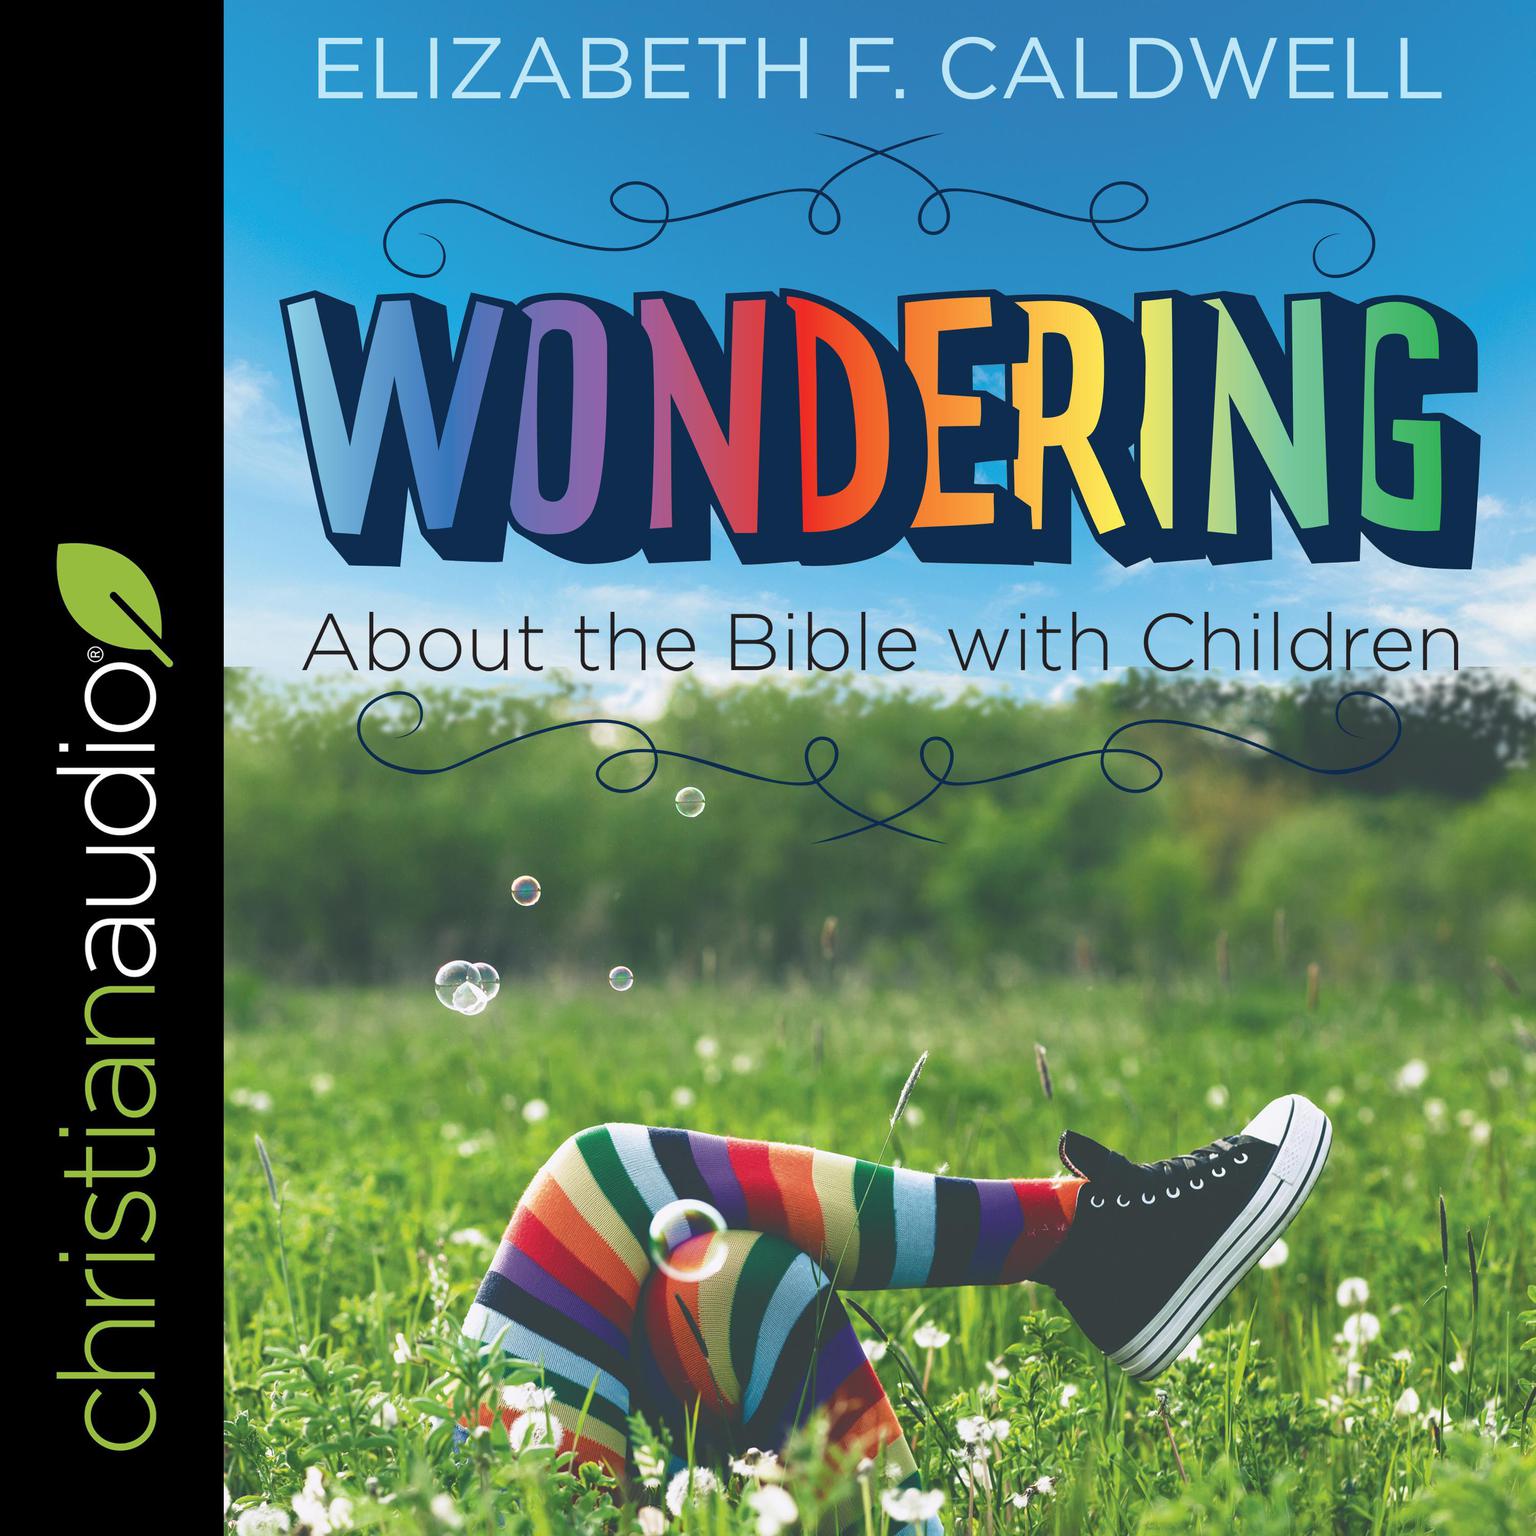 Wondering about the Bible with Children: Engaging a Childs Curiosity about the Bible Audiobook, by Elizabeth F. Caldwell